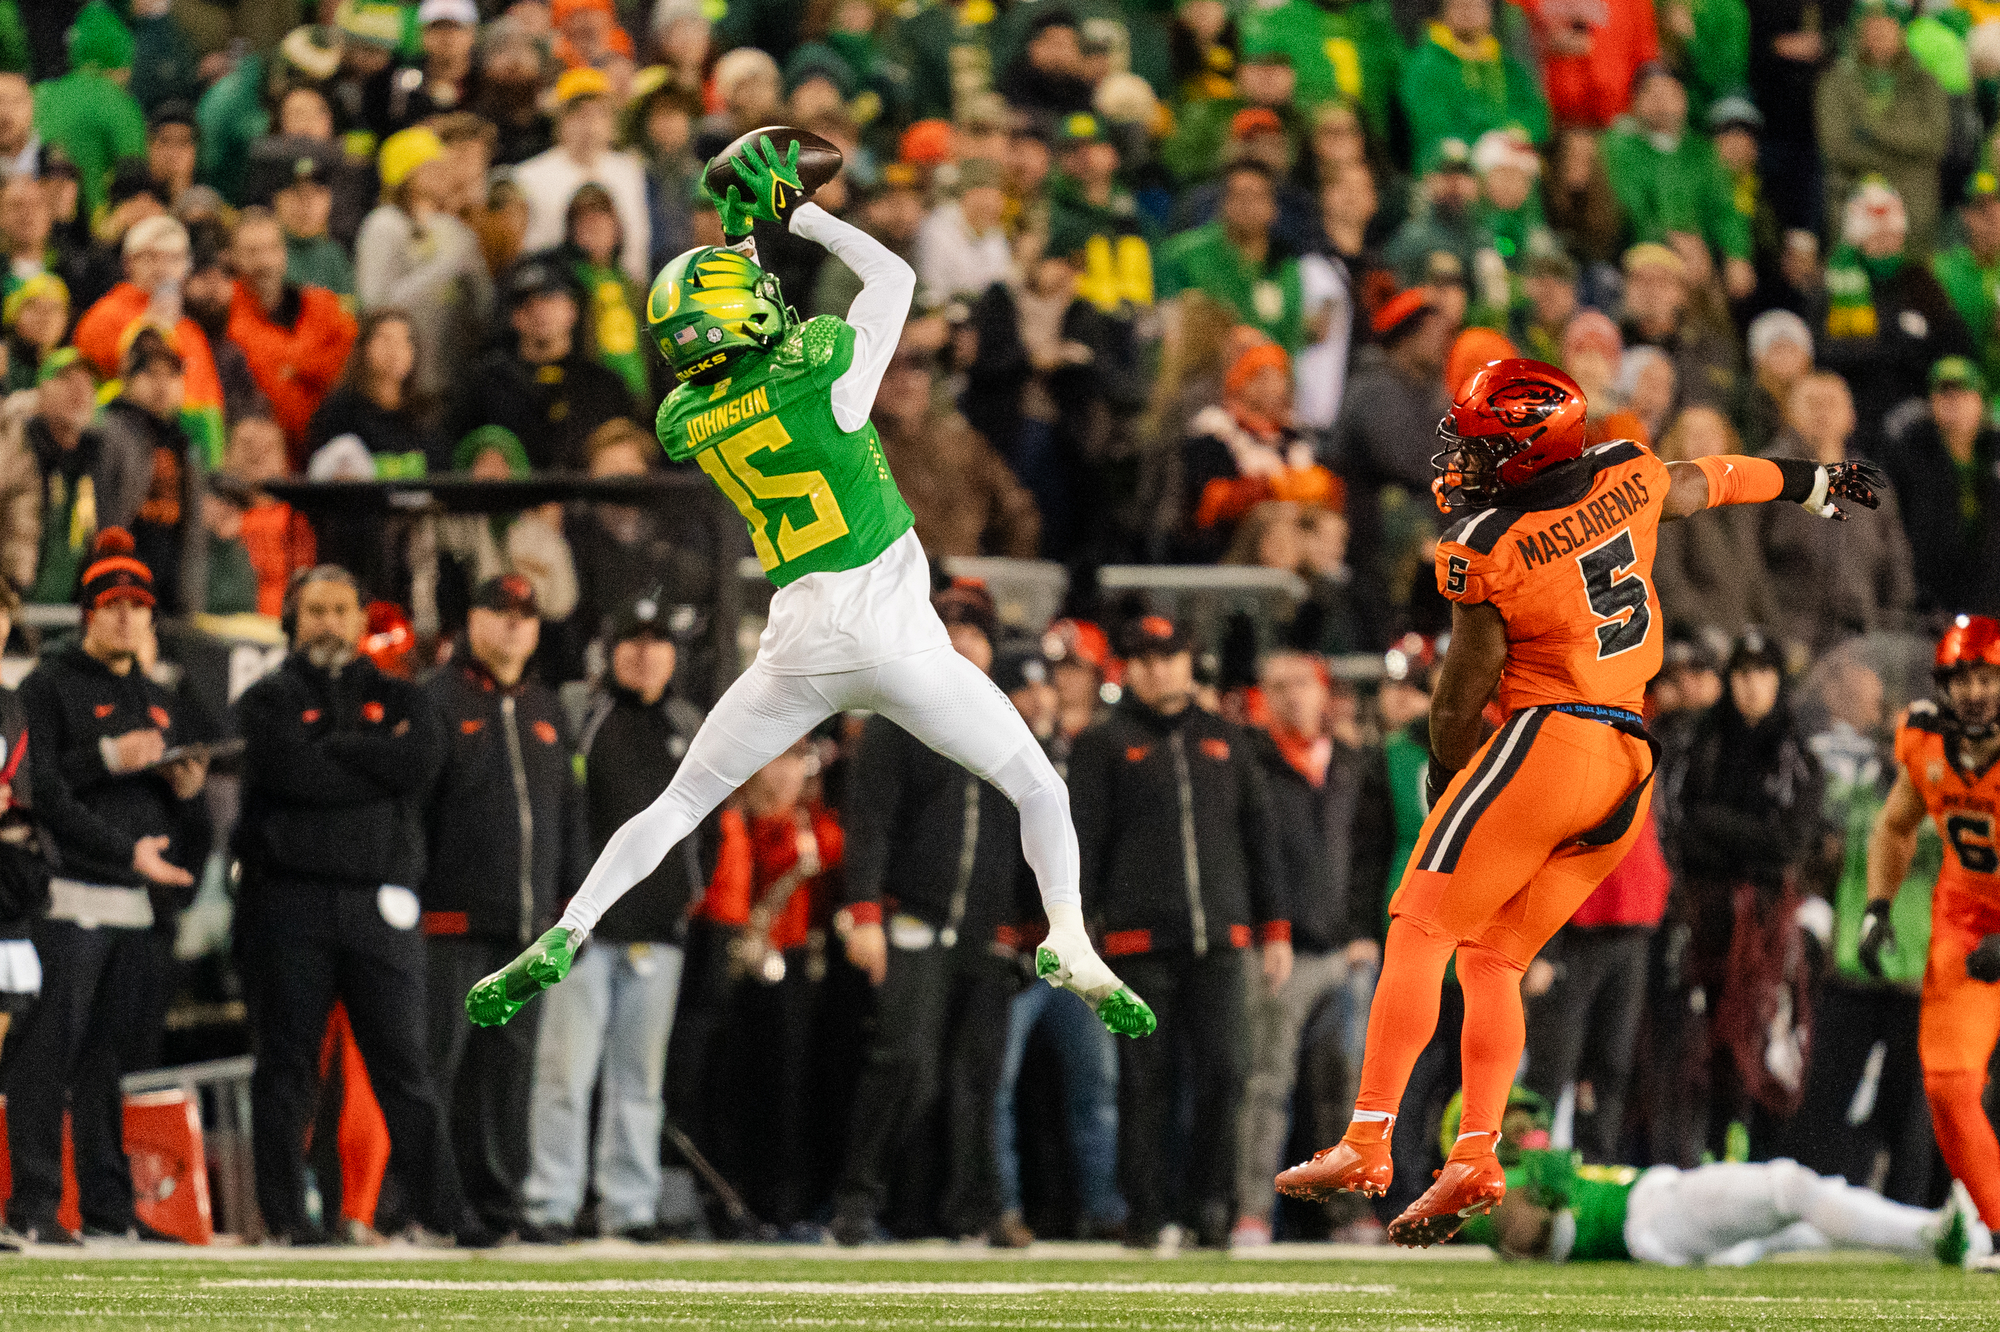 The Oregon Ducks deserve a playoff berth if they can take care of ‘unfinished business’ in the Pac-12 title game